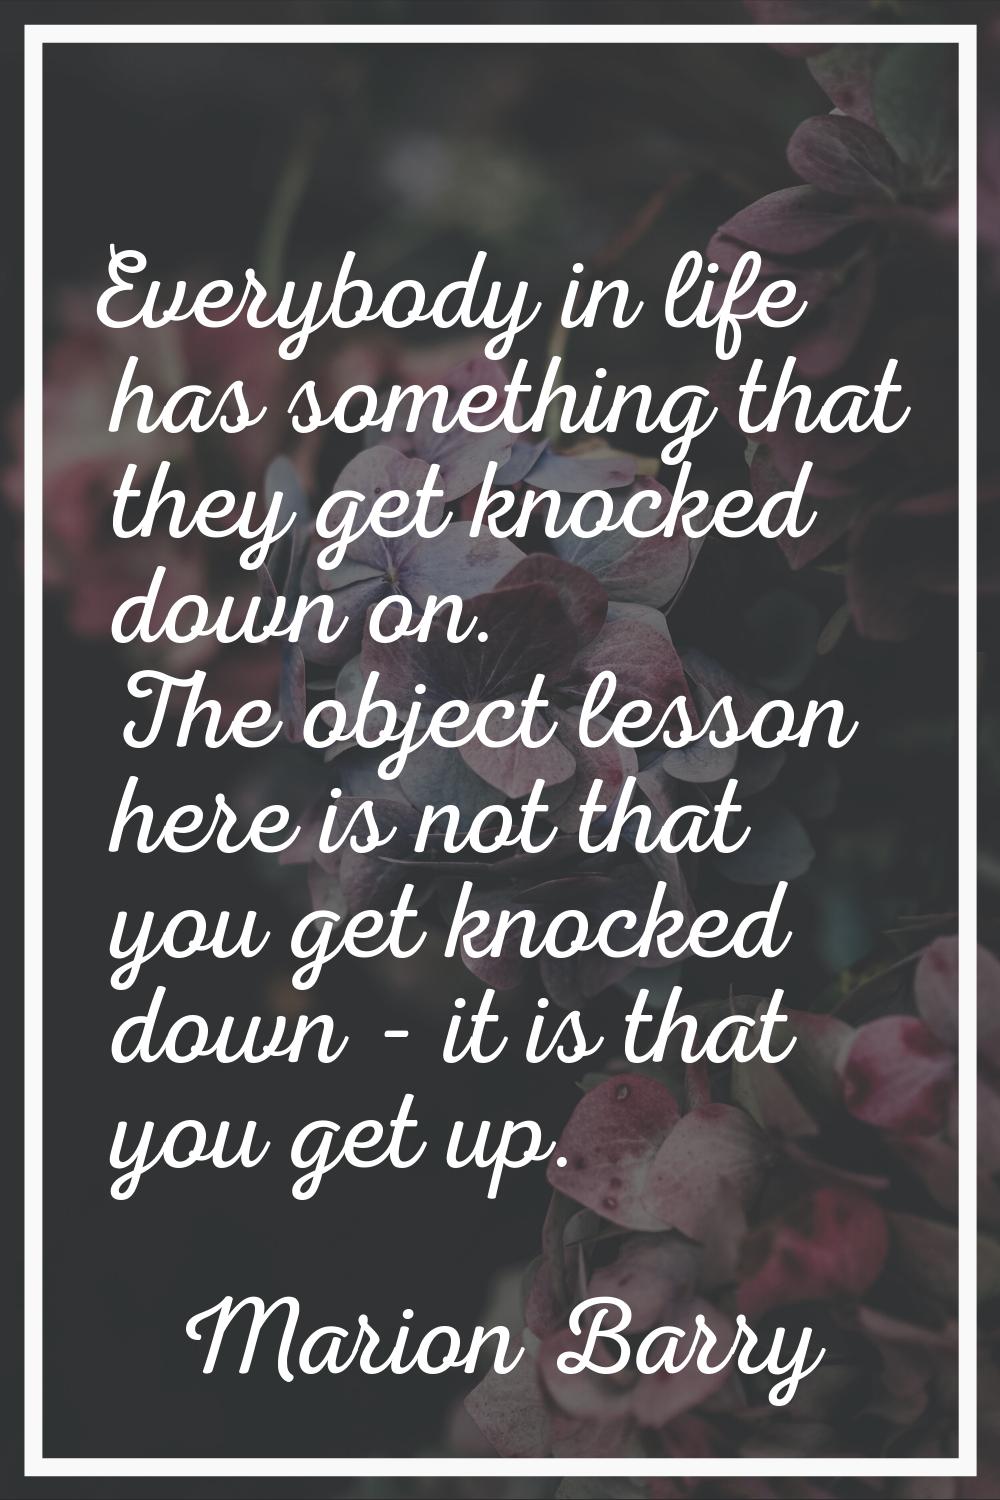 Everybody in life has something that they get knocked down on. The object lesson here is not that y